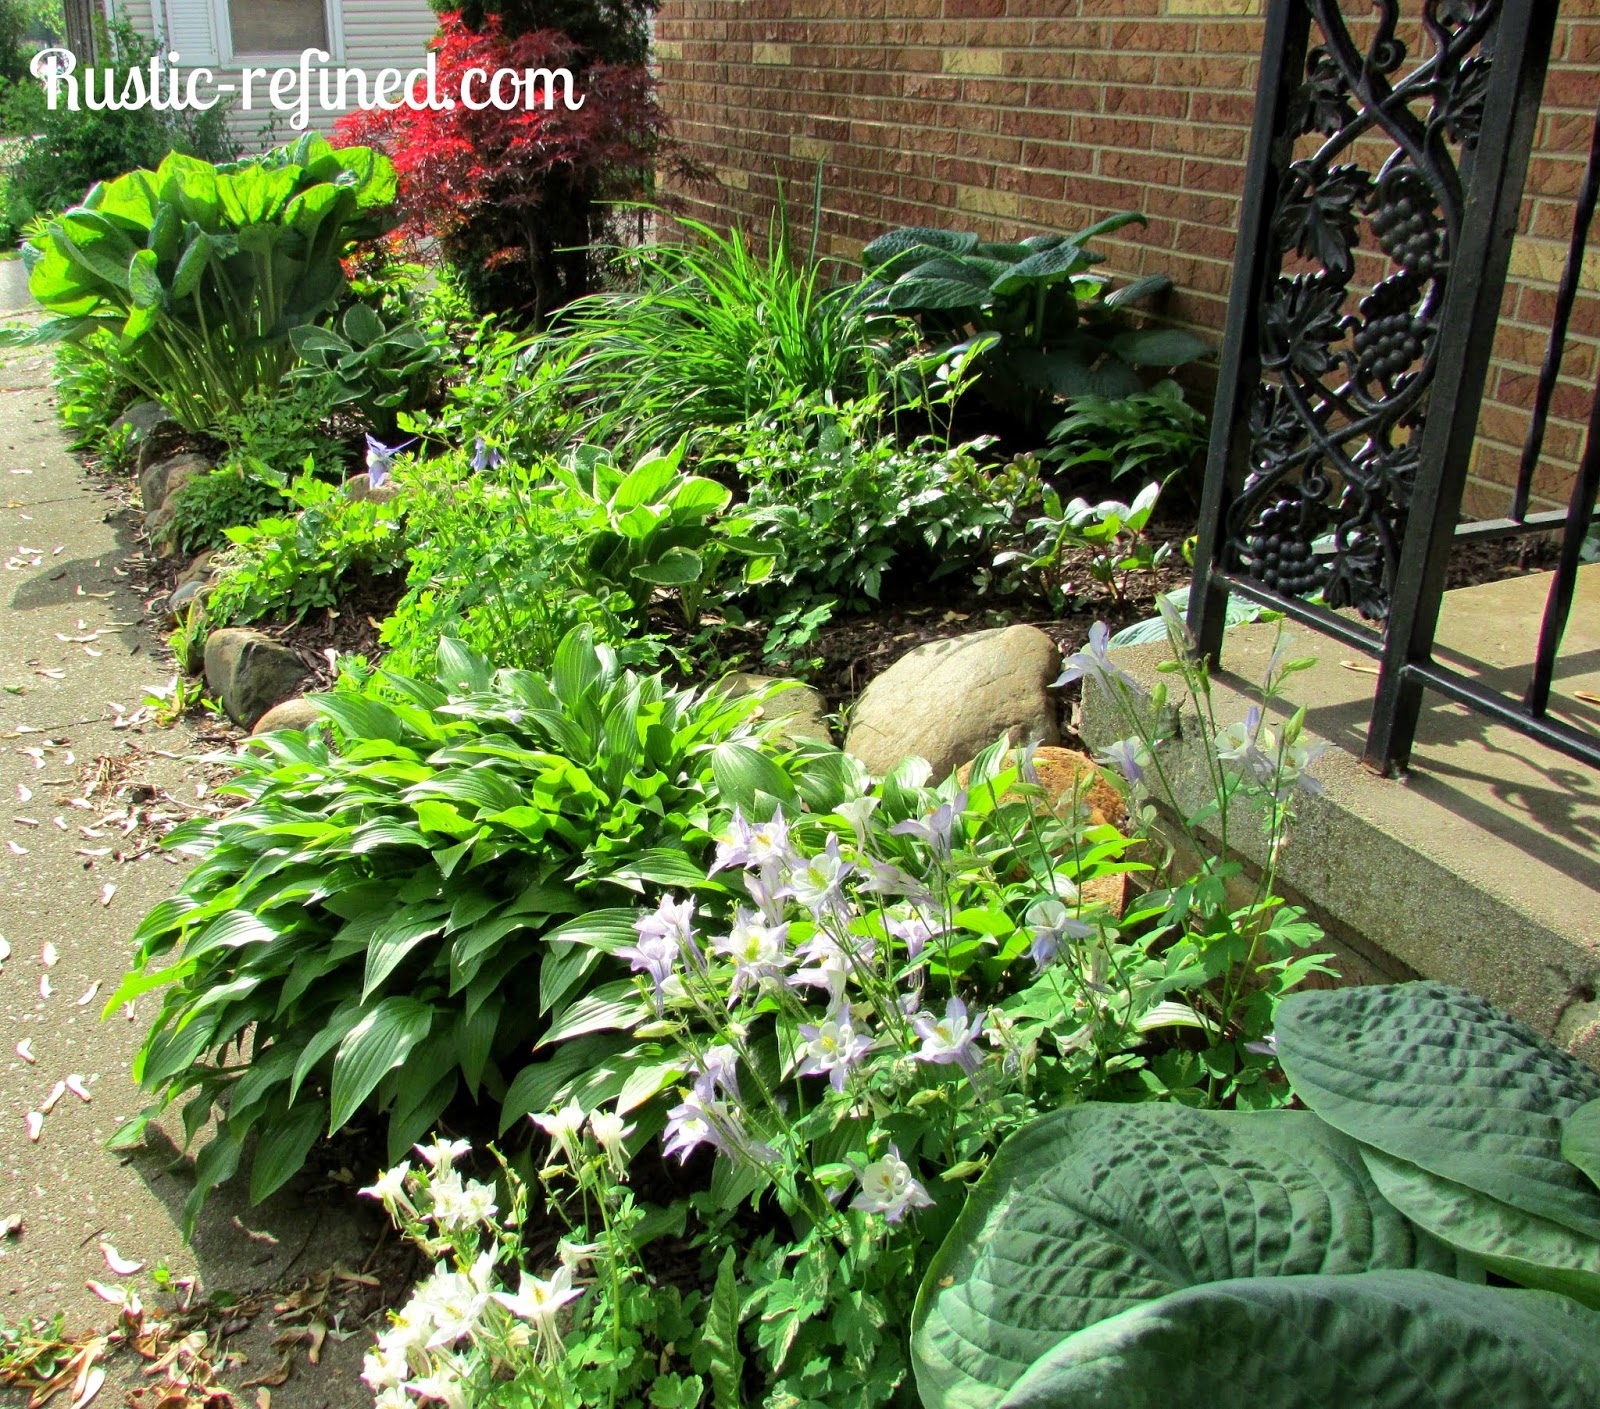 Late Spring Garden Tour 2014 | Rustic & Refined